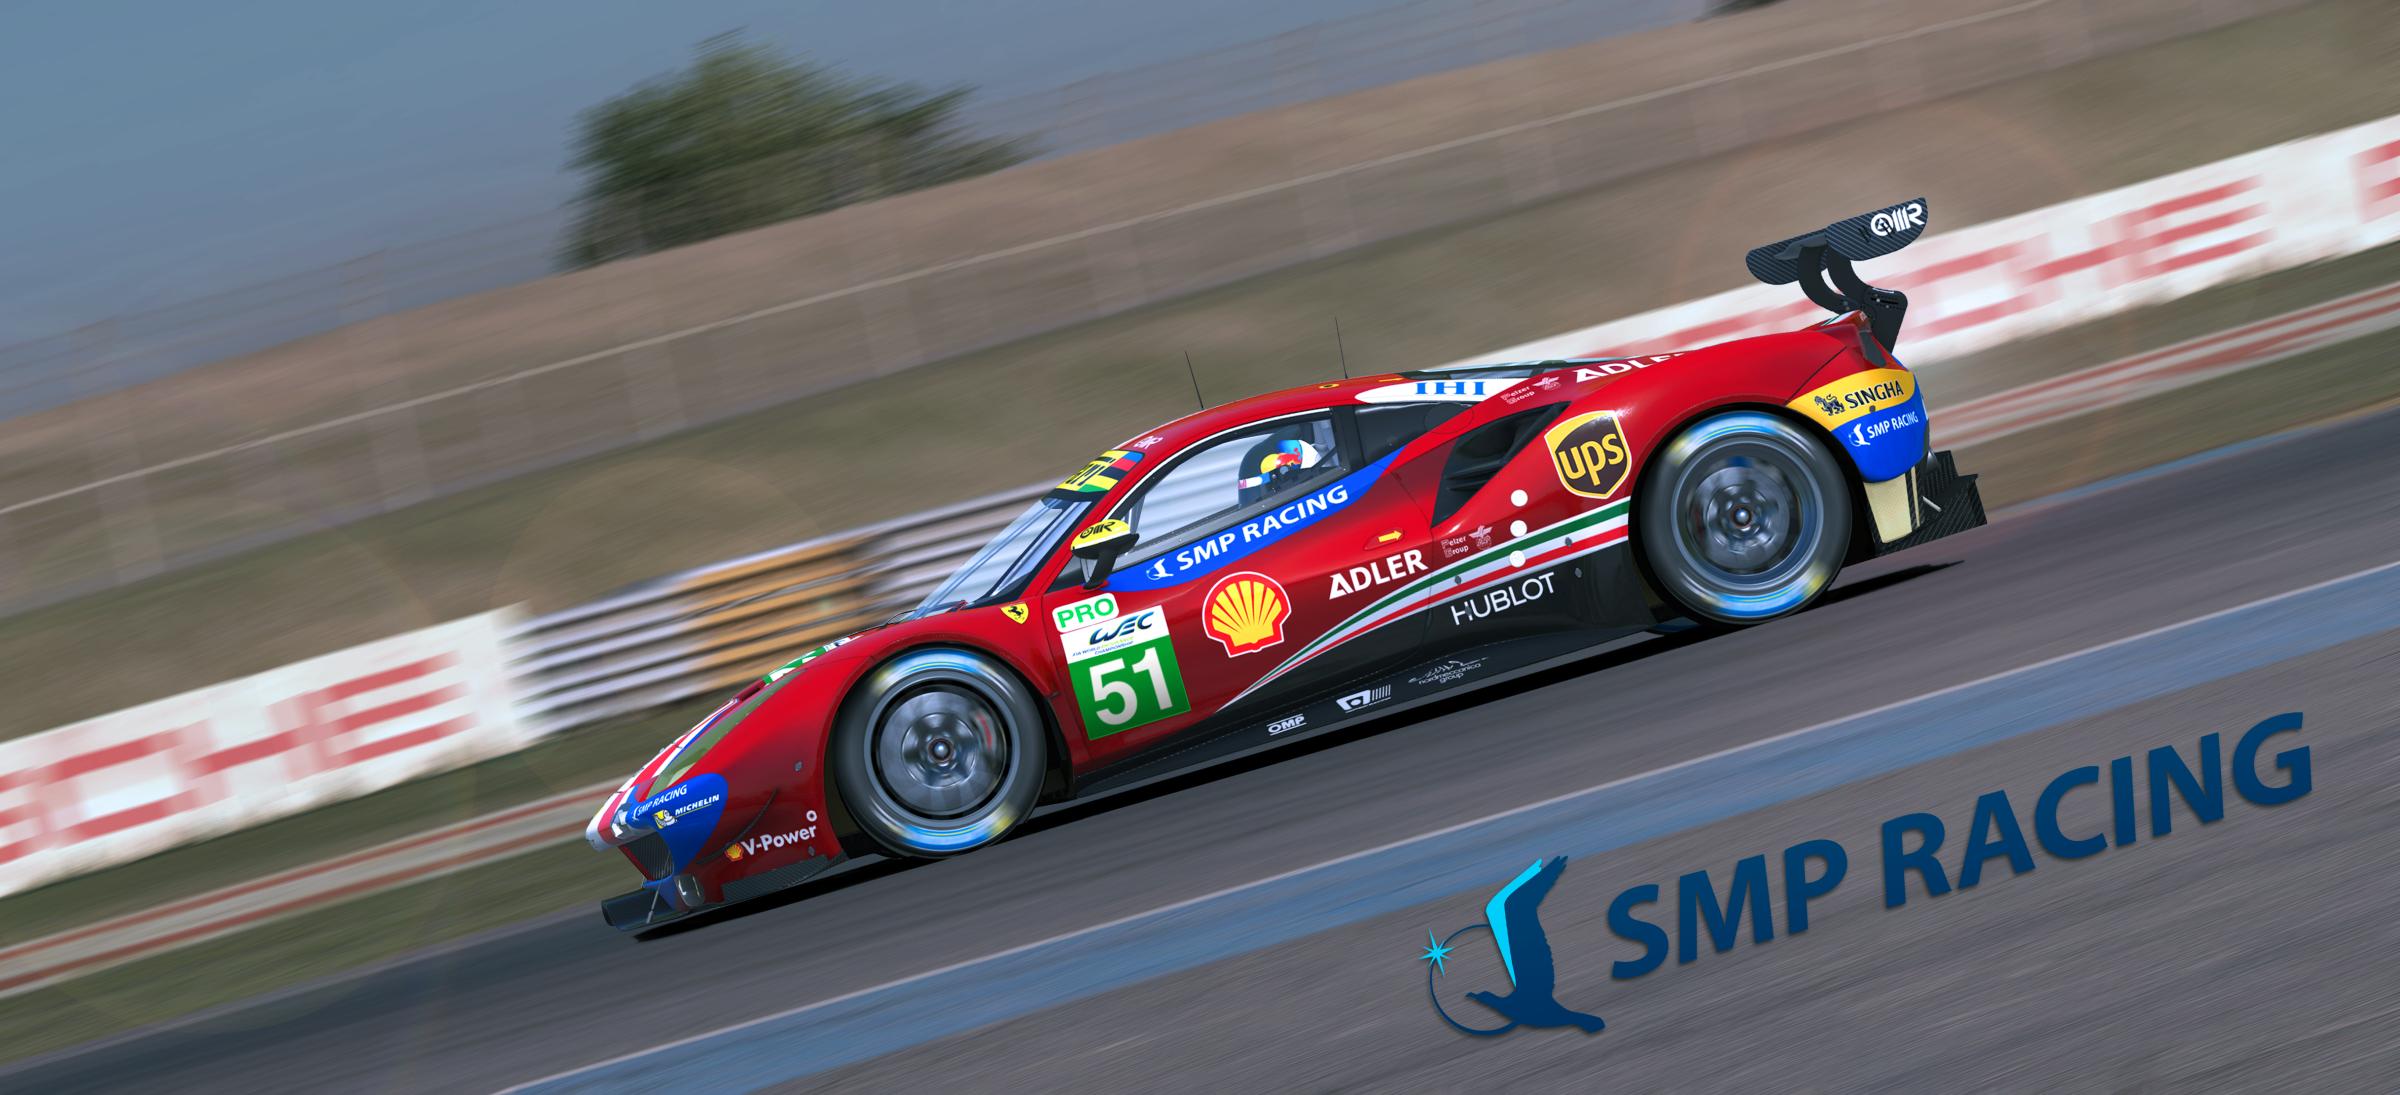 Preview of #51 AF Corse / SMP Racing Ferrari 488 GTE (2018 WEC) by Justin S Davis